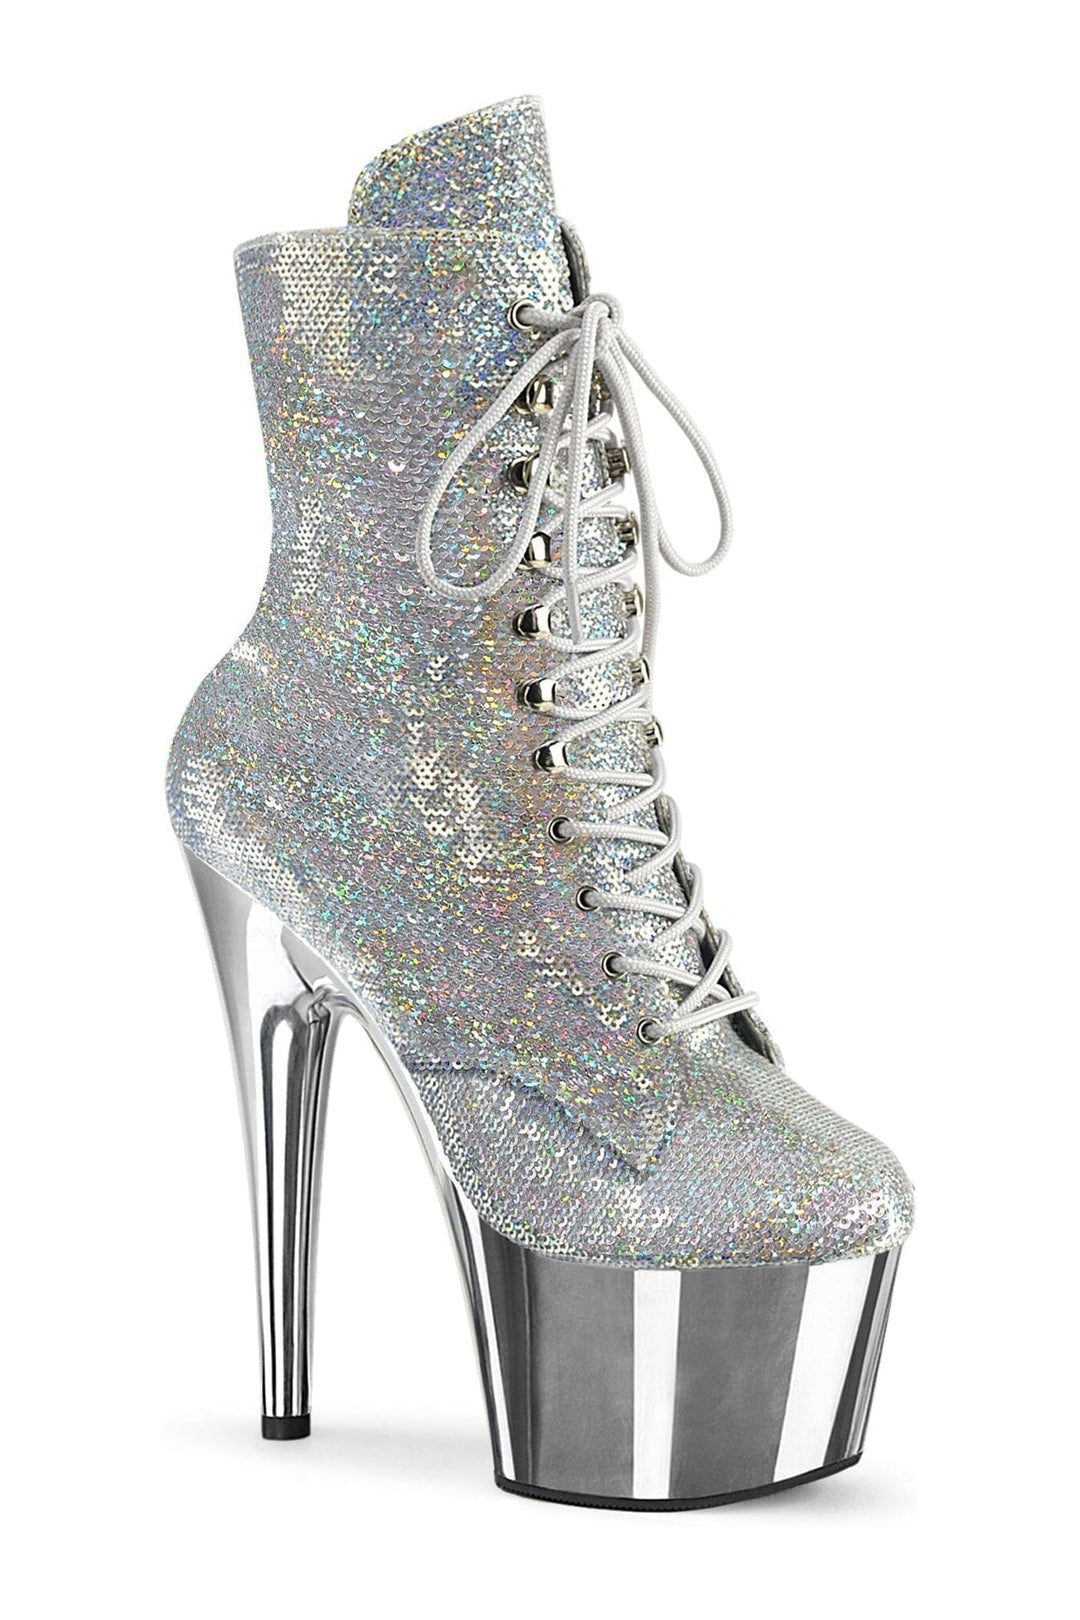 ADORE-1020SQ-02 Silver Sequins Ankle Boot-Ankle Boots-Pleaser-Silver-10-Sequins-SEXYSHOES.COM